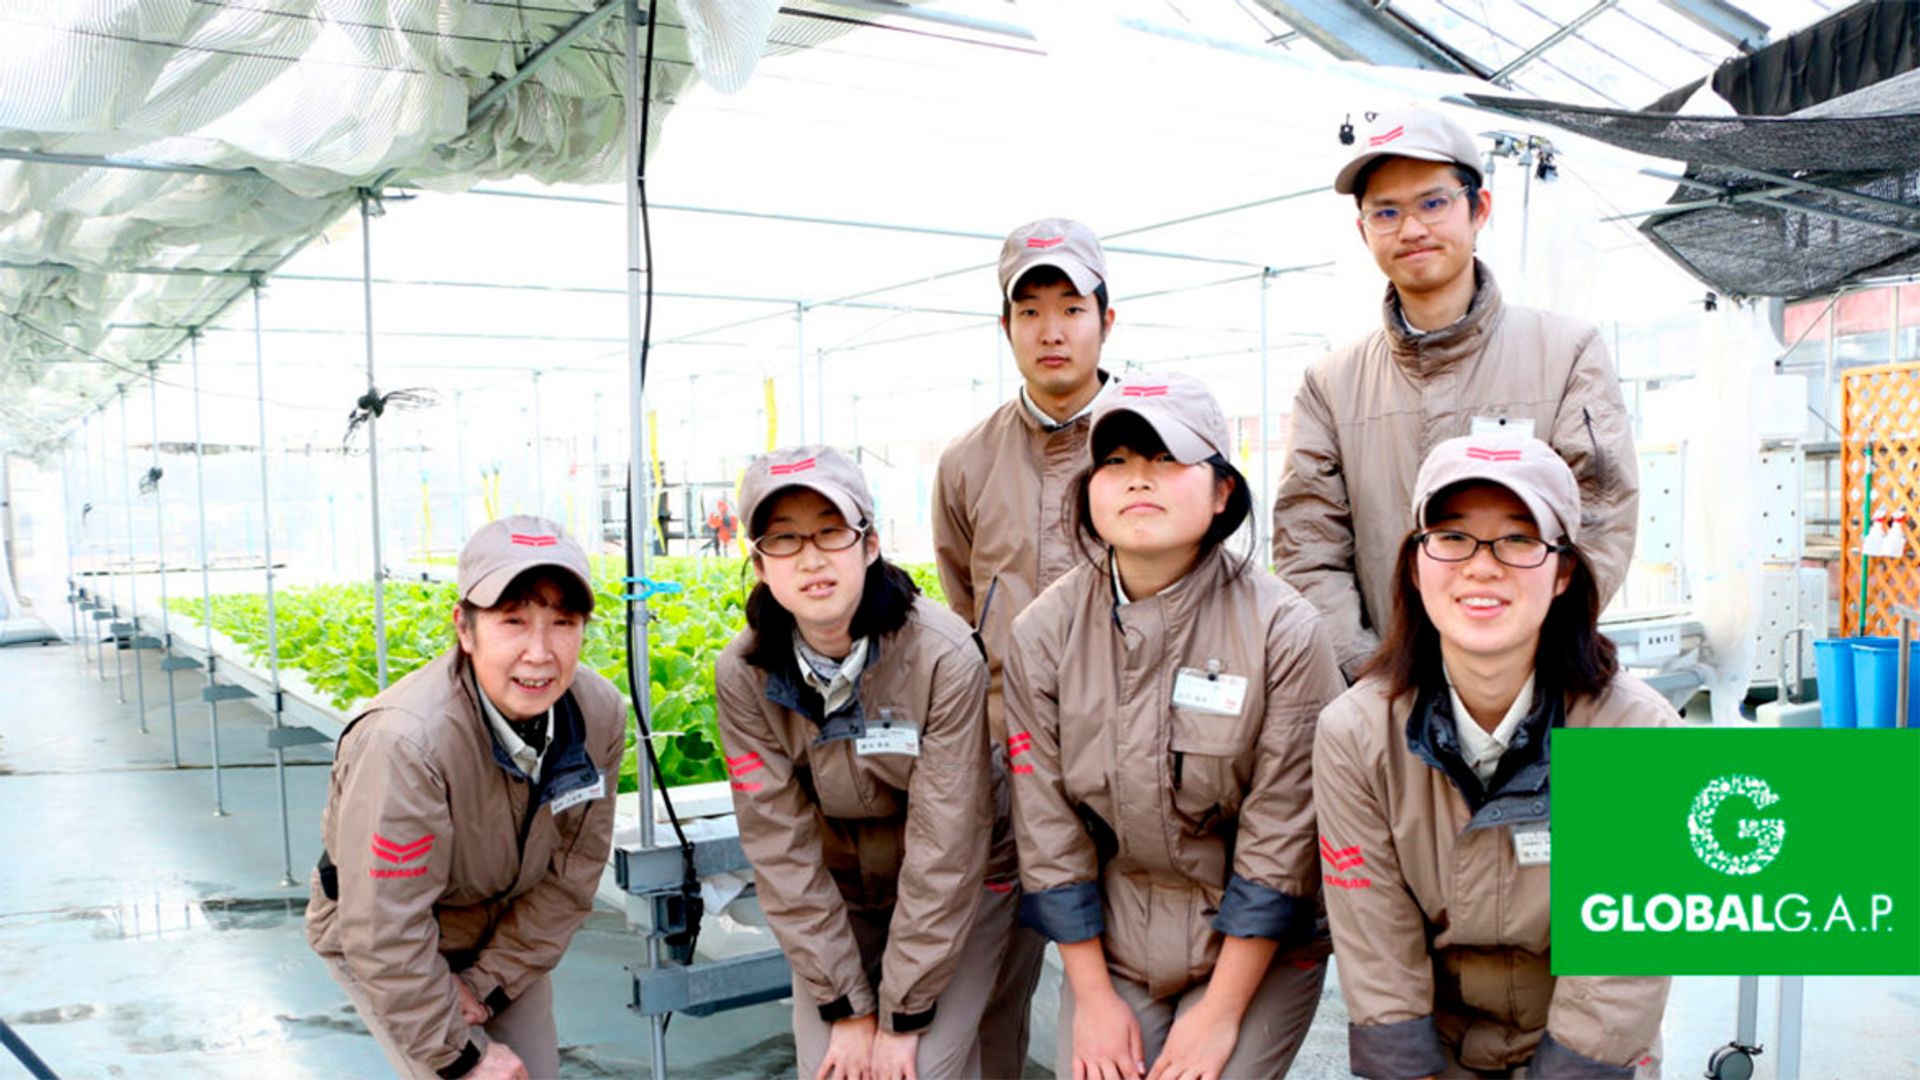 Image of workers from a farm with GLOBALG.A.P.-certified production processes